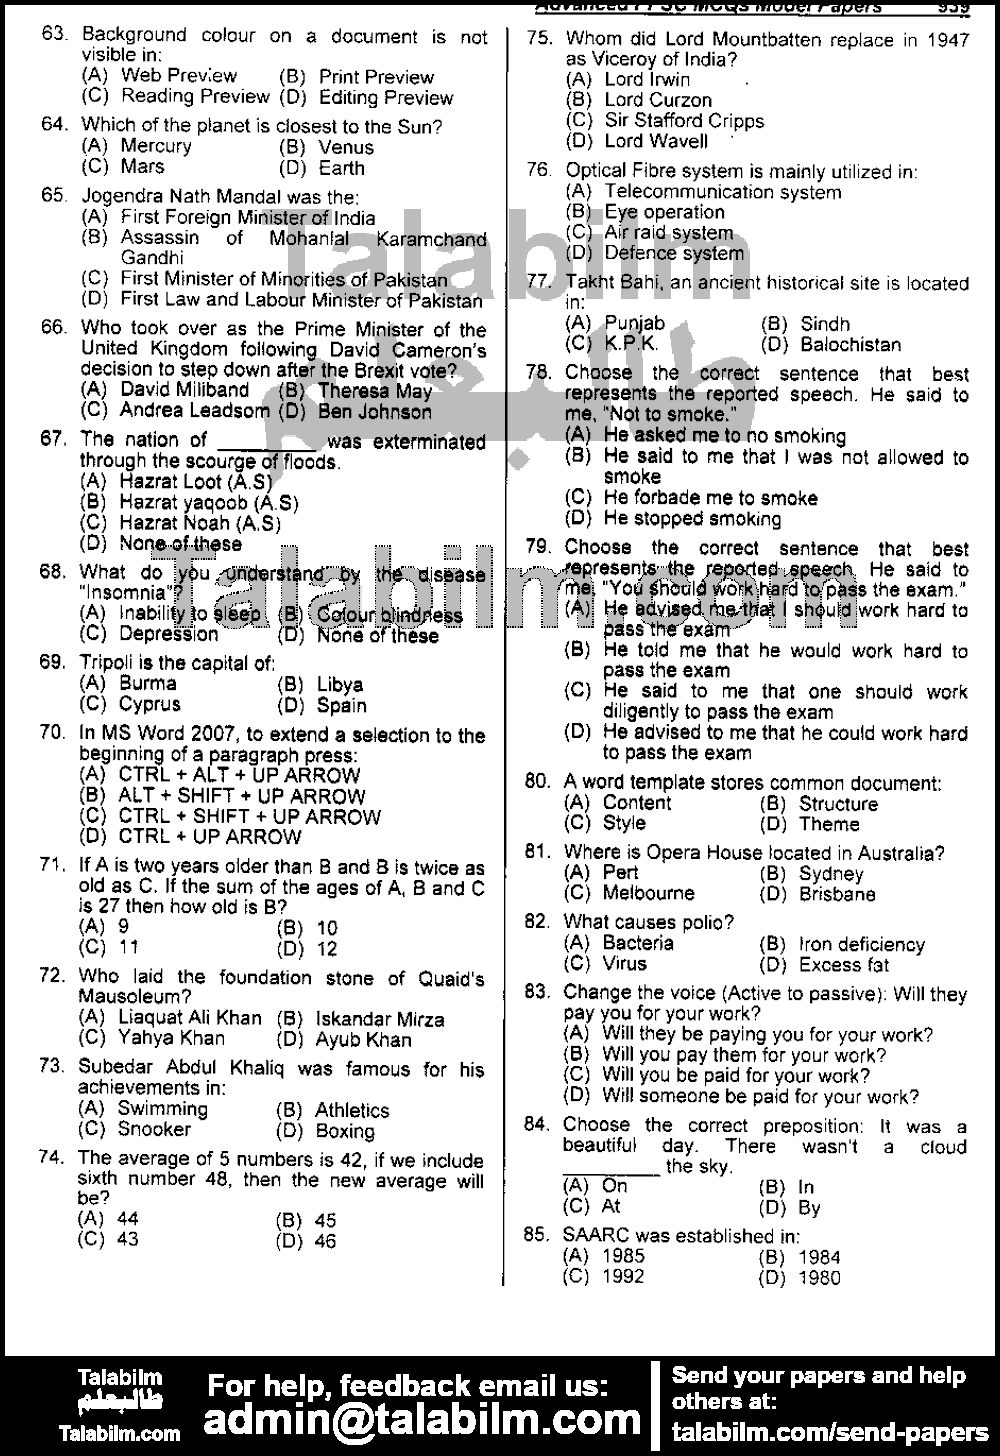 General Elementary School Educator 0 past paper for 2019 Evening Paper Page No. 4